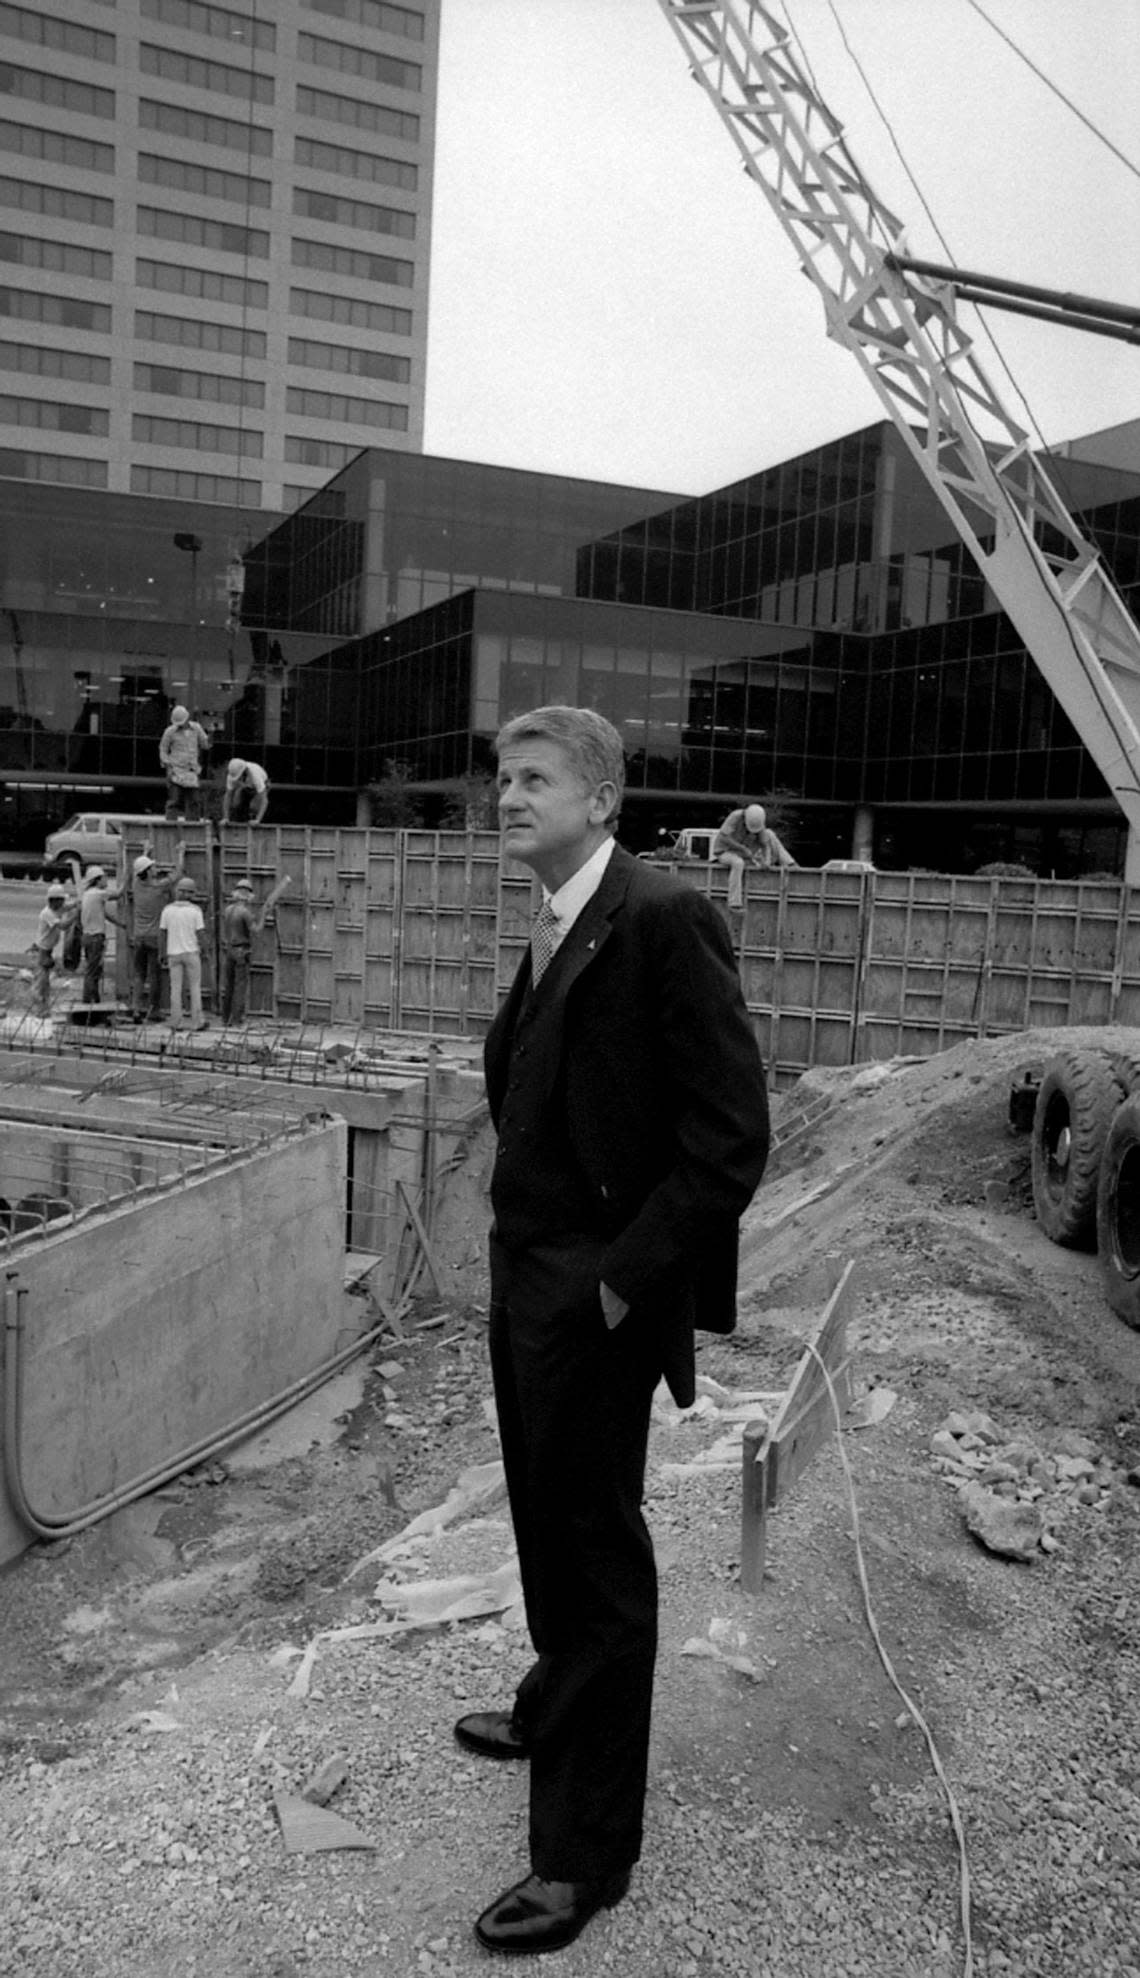 Beginning in October 1981 The Lexington Leader published a five-part series on Lexington’s 10 most influential citizens. Included in the second part of the series was Lexington businessman Alex Campbell, along with Lexington Mayor Jim Amato. Campbell was photographed on the site of what would become Triangle Park, across from the new Lexington Center and Rupp Arena. Campbell thought the triangular lot was a perfect site for a park and fountain; the city agreed but didn’t have the $1 million to fund it. With the help of several friends in the business community, Campbell raised the money and established the Triangle Foundation, which they grew into an endowment fund used to fund capital-improvement-type civic projects.